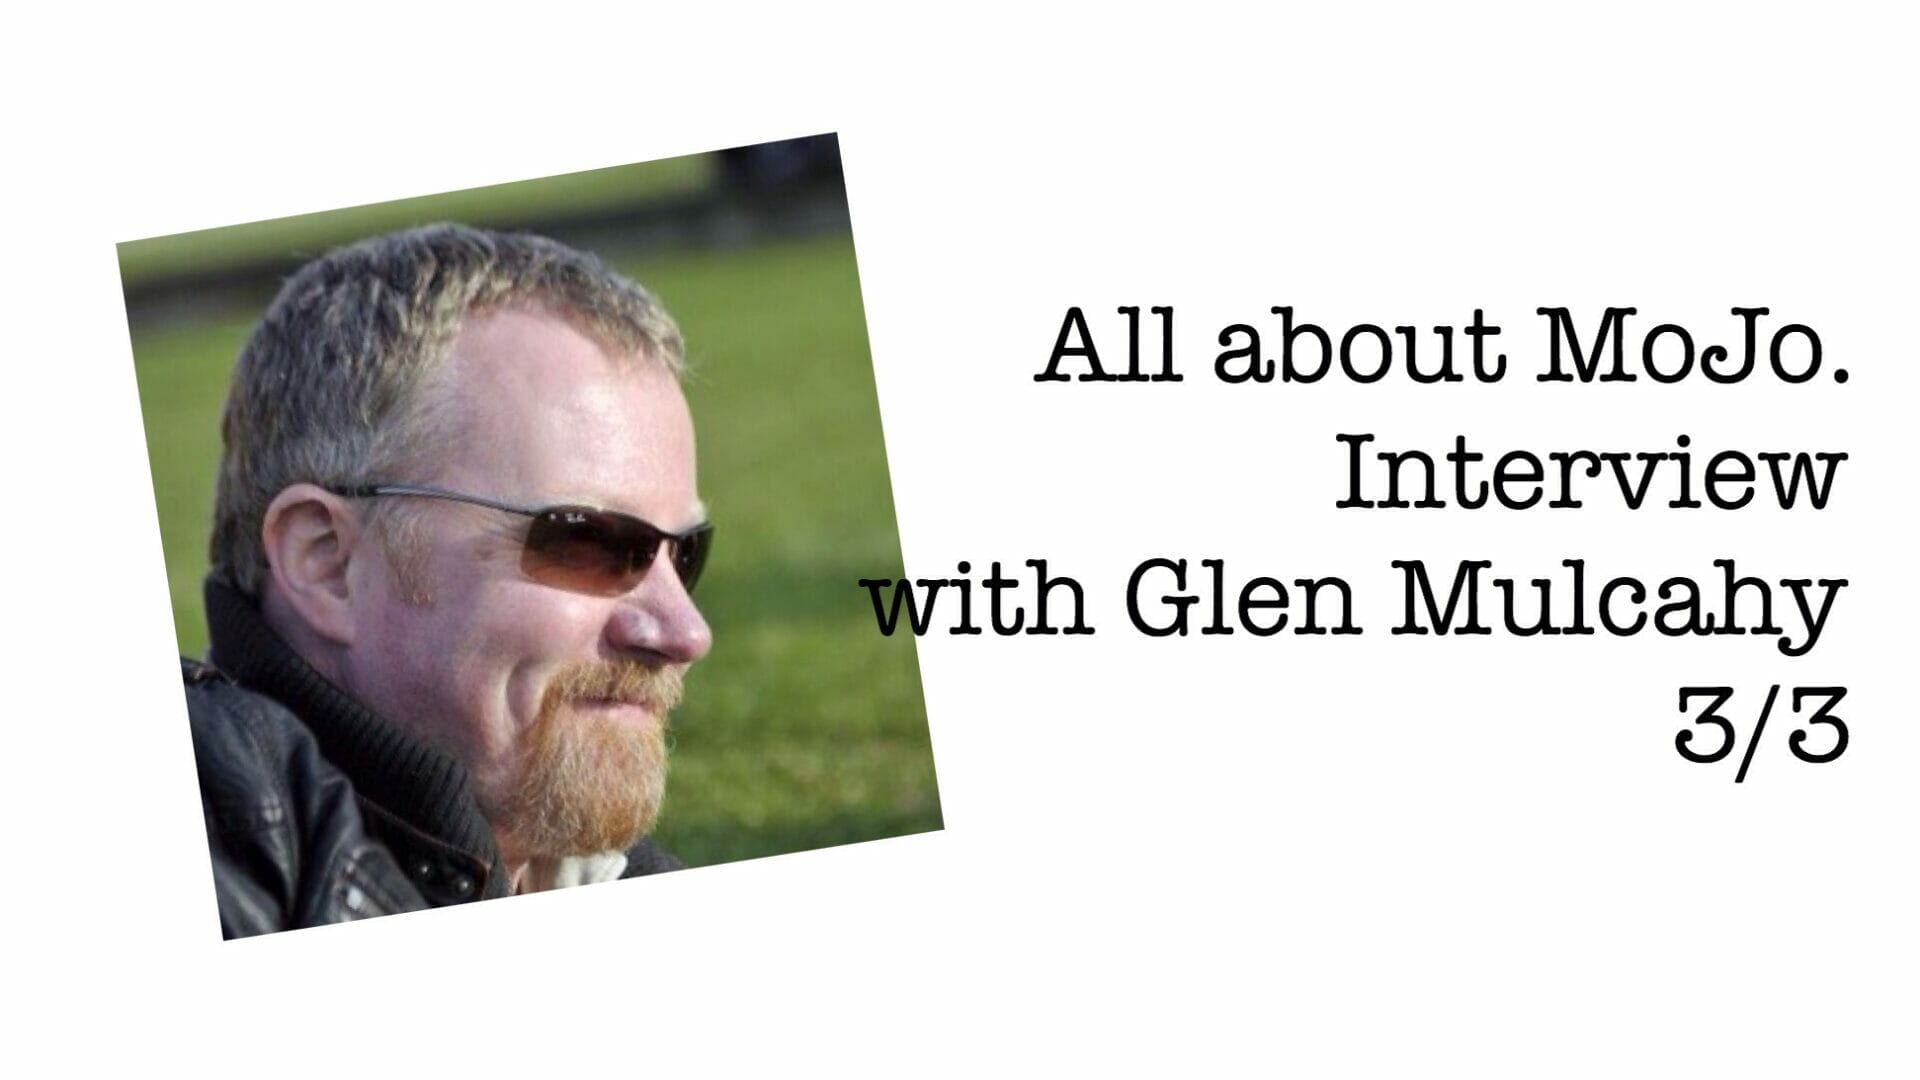 All about MoJo. Interview with Glen Mulcahy